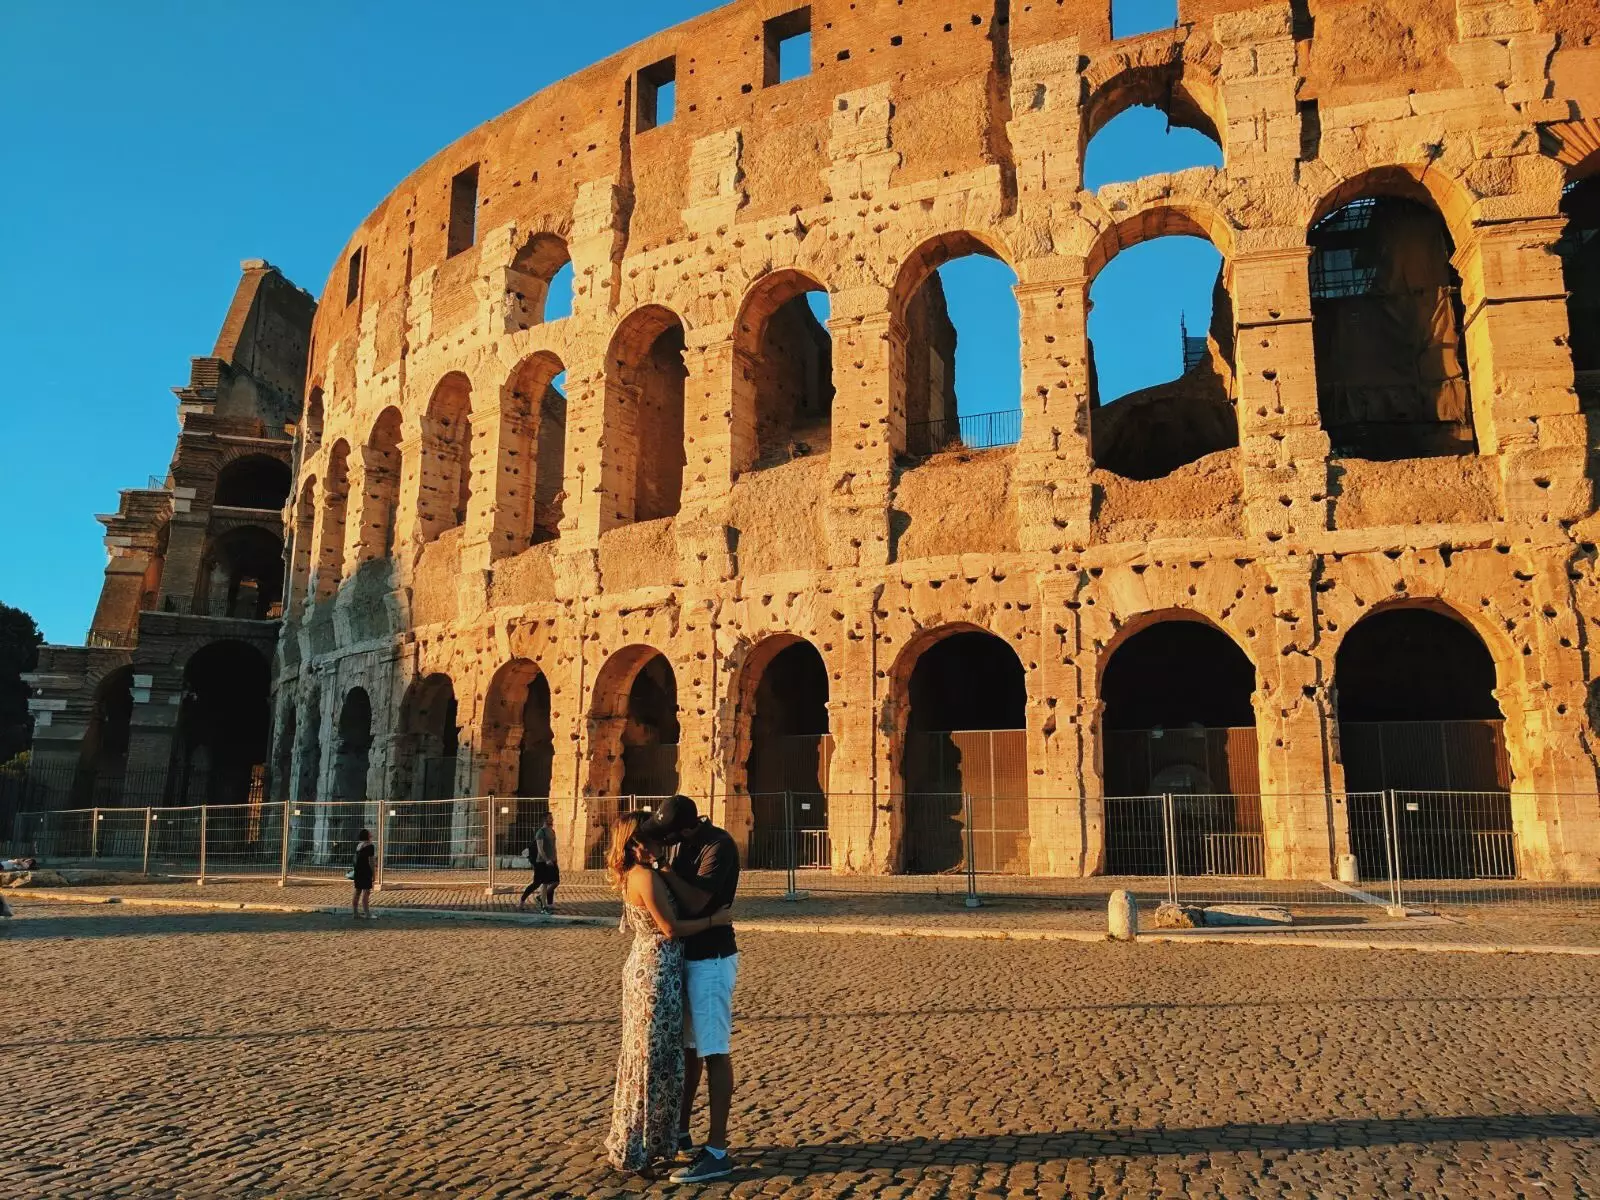 She grabbed a guy in front of the Colosseum.